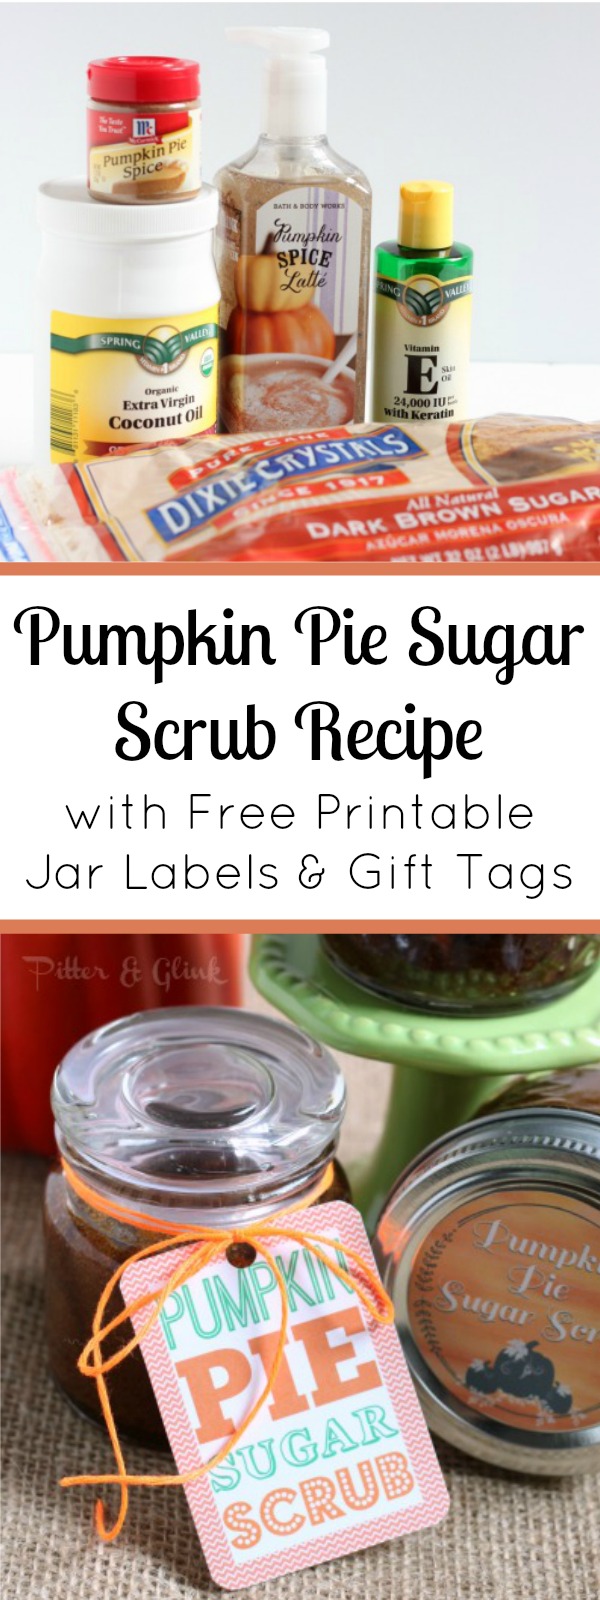 Make a sugar scrub that smells like pumpkin pie--great for a gift or party favor! Free printable jar labels and gift tags in post. pitterandglink.com